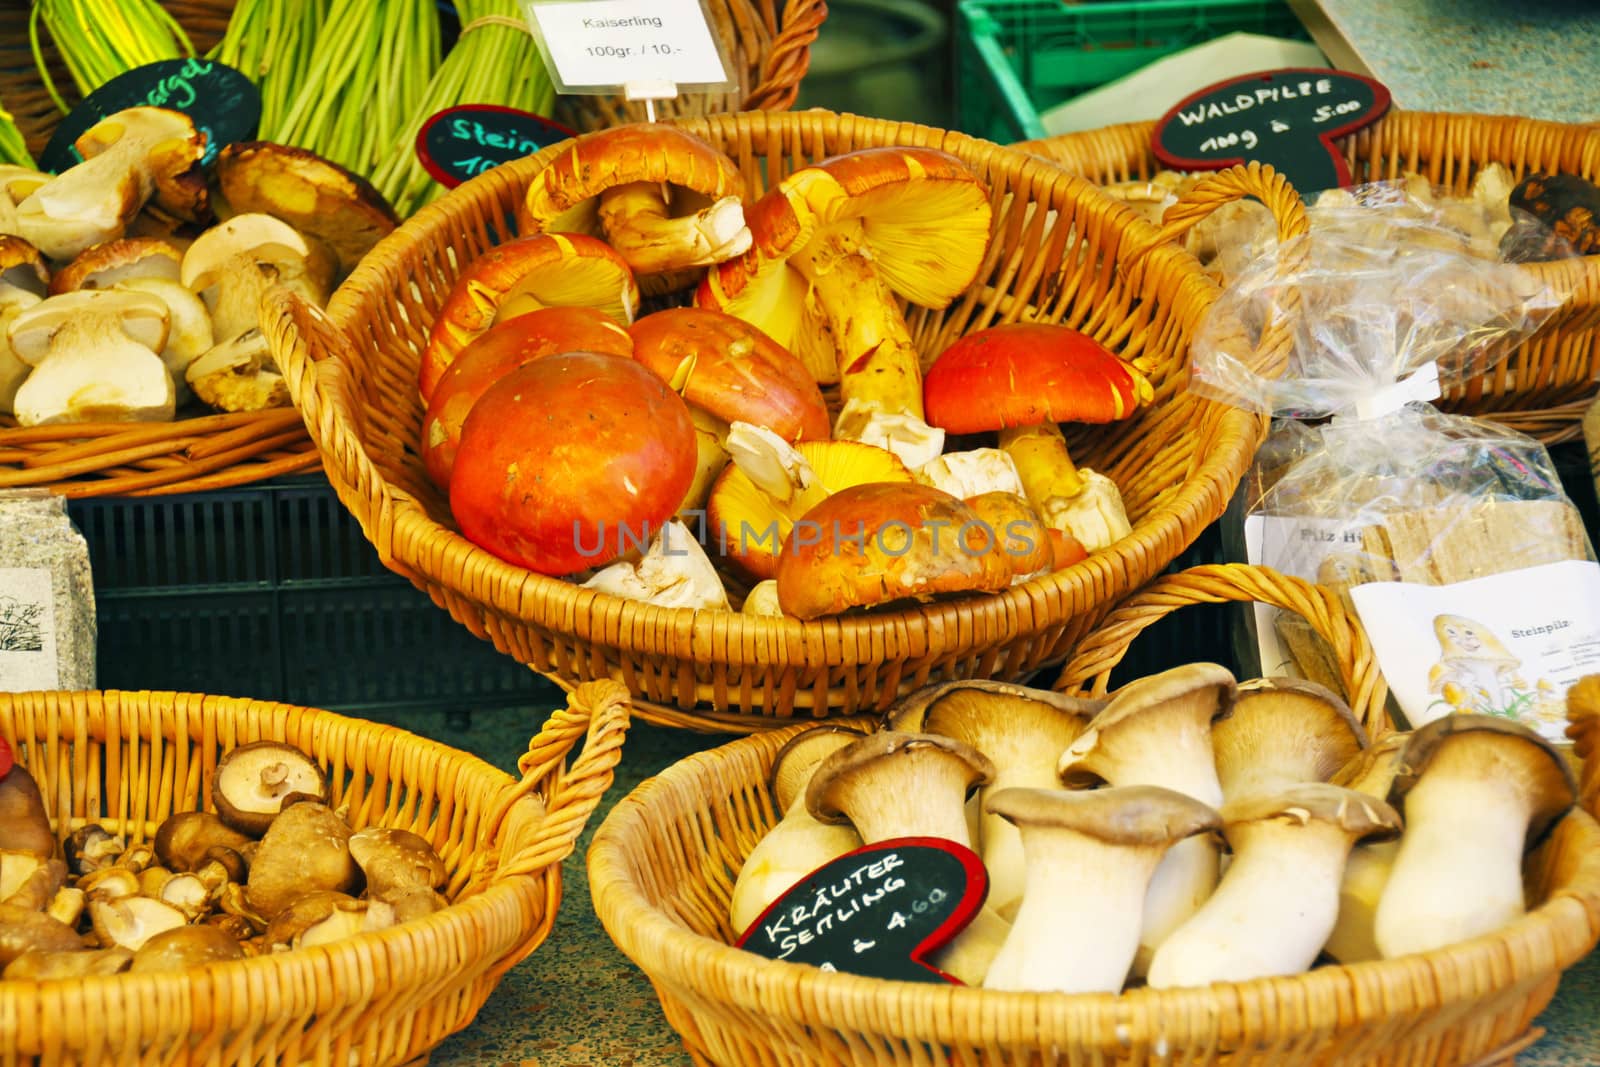 A variety of wild forest mushrooms on a market stall in Basel, Switzerland.